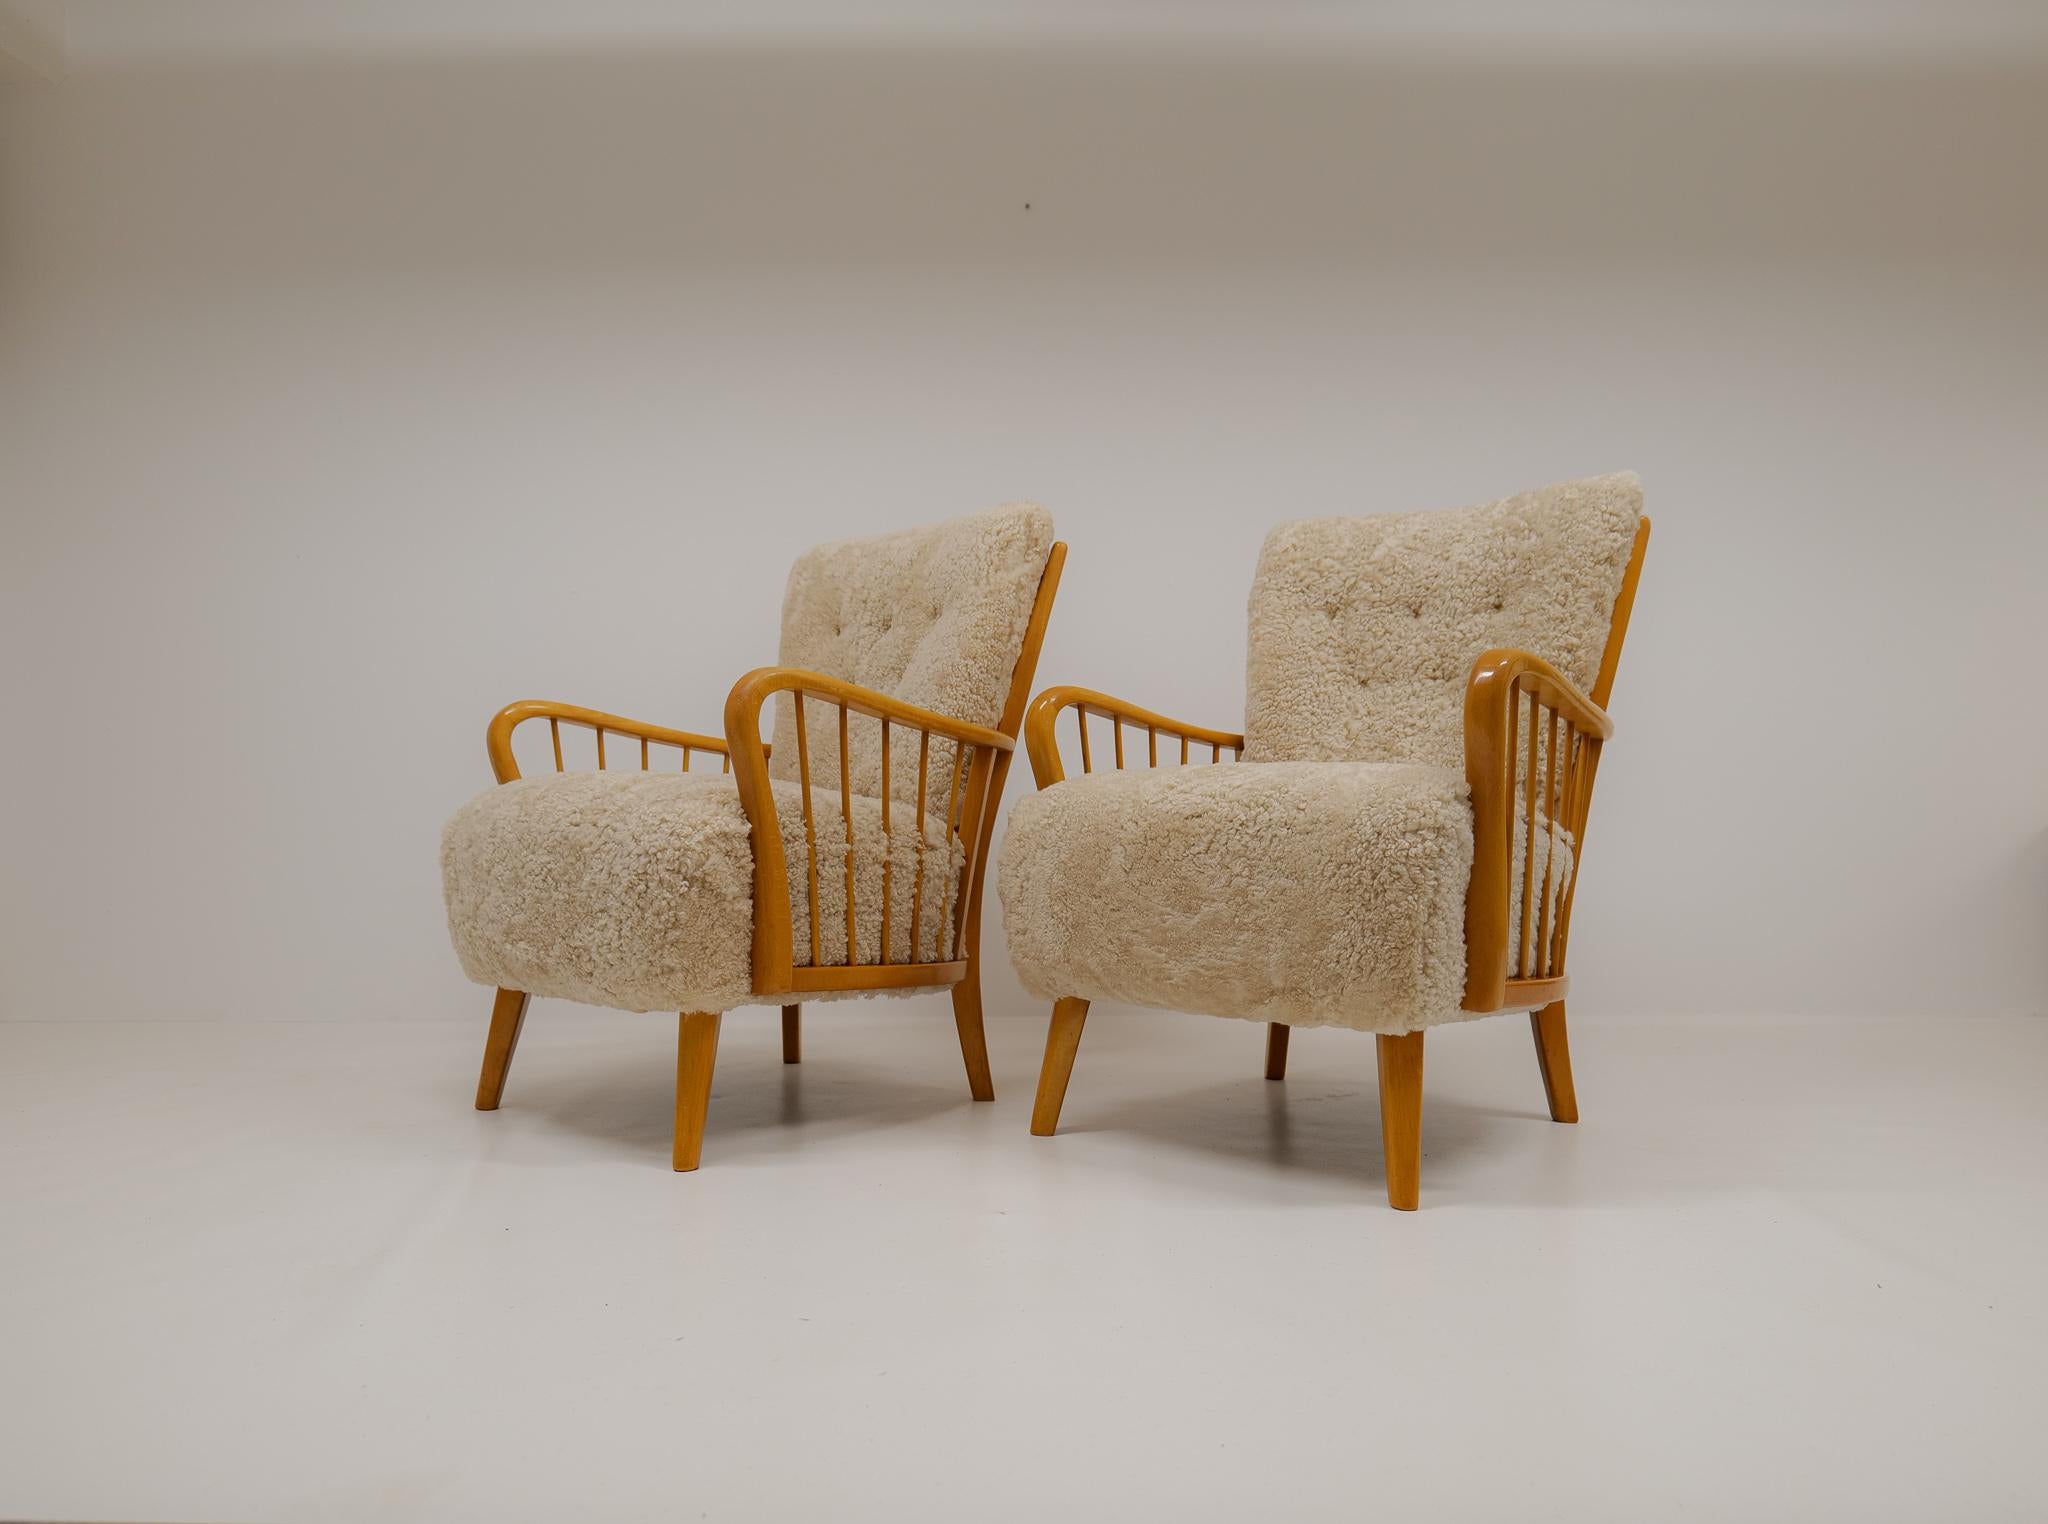 These curved and elegant chairs produced in Sweden during the 1940s is made from lacquered birch. The new upholstery in Sheepskin/shearling works perfectly with the curved wood. This is good example of Swedish craftmanship, and the lounge chairs a